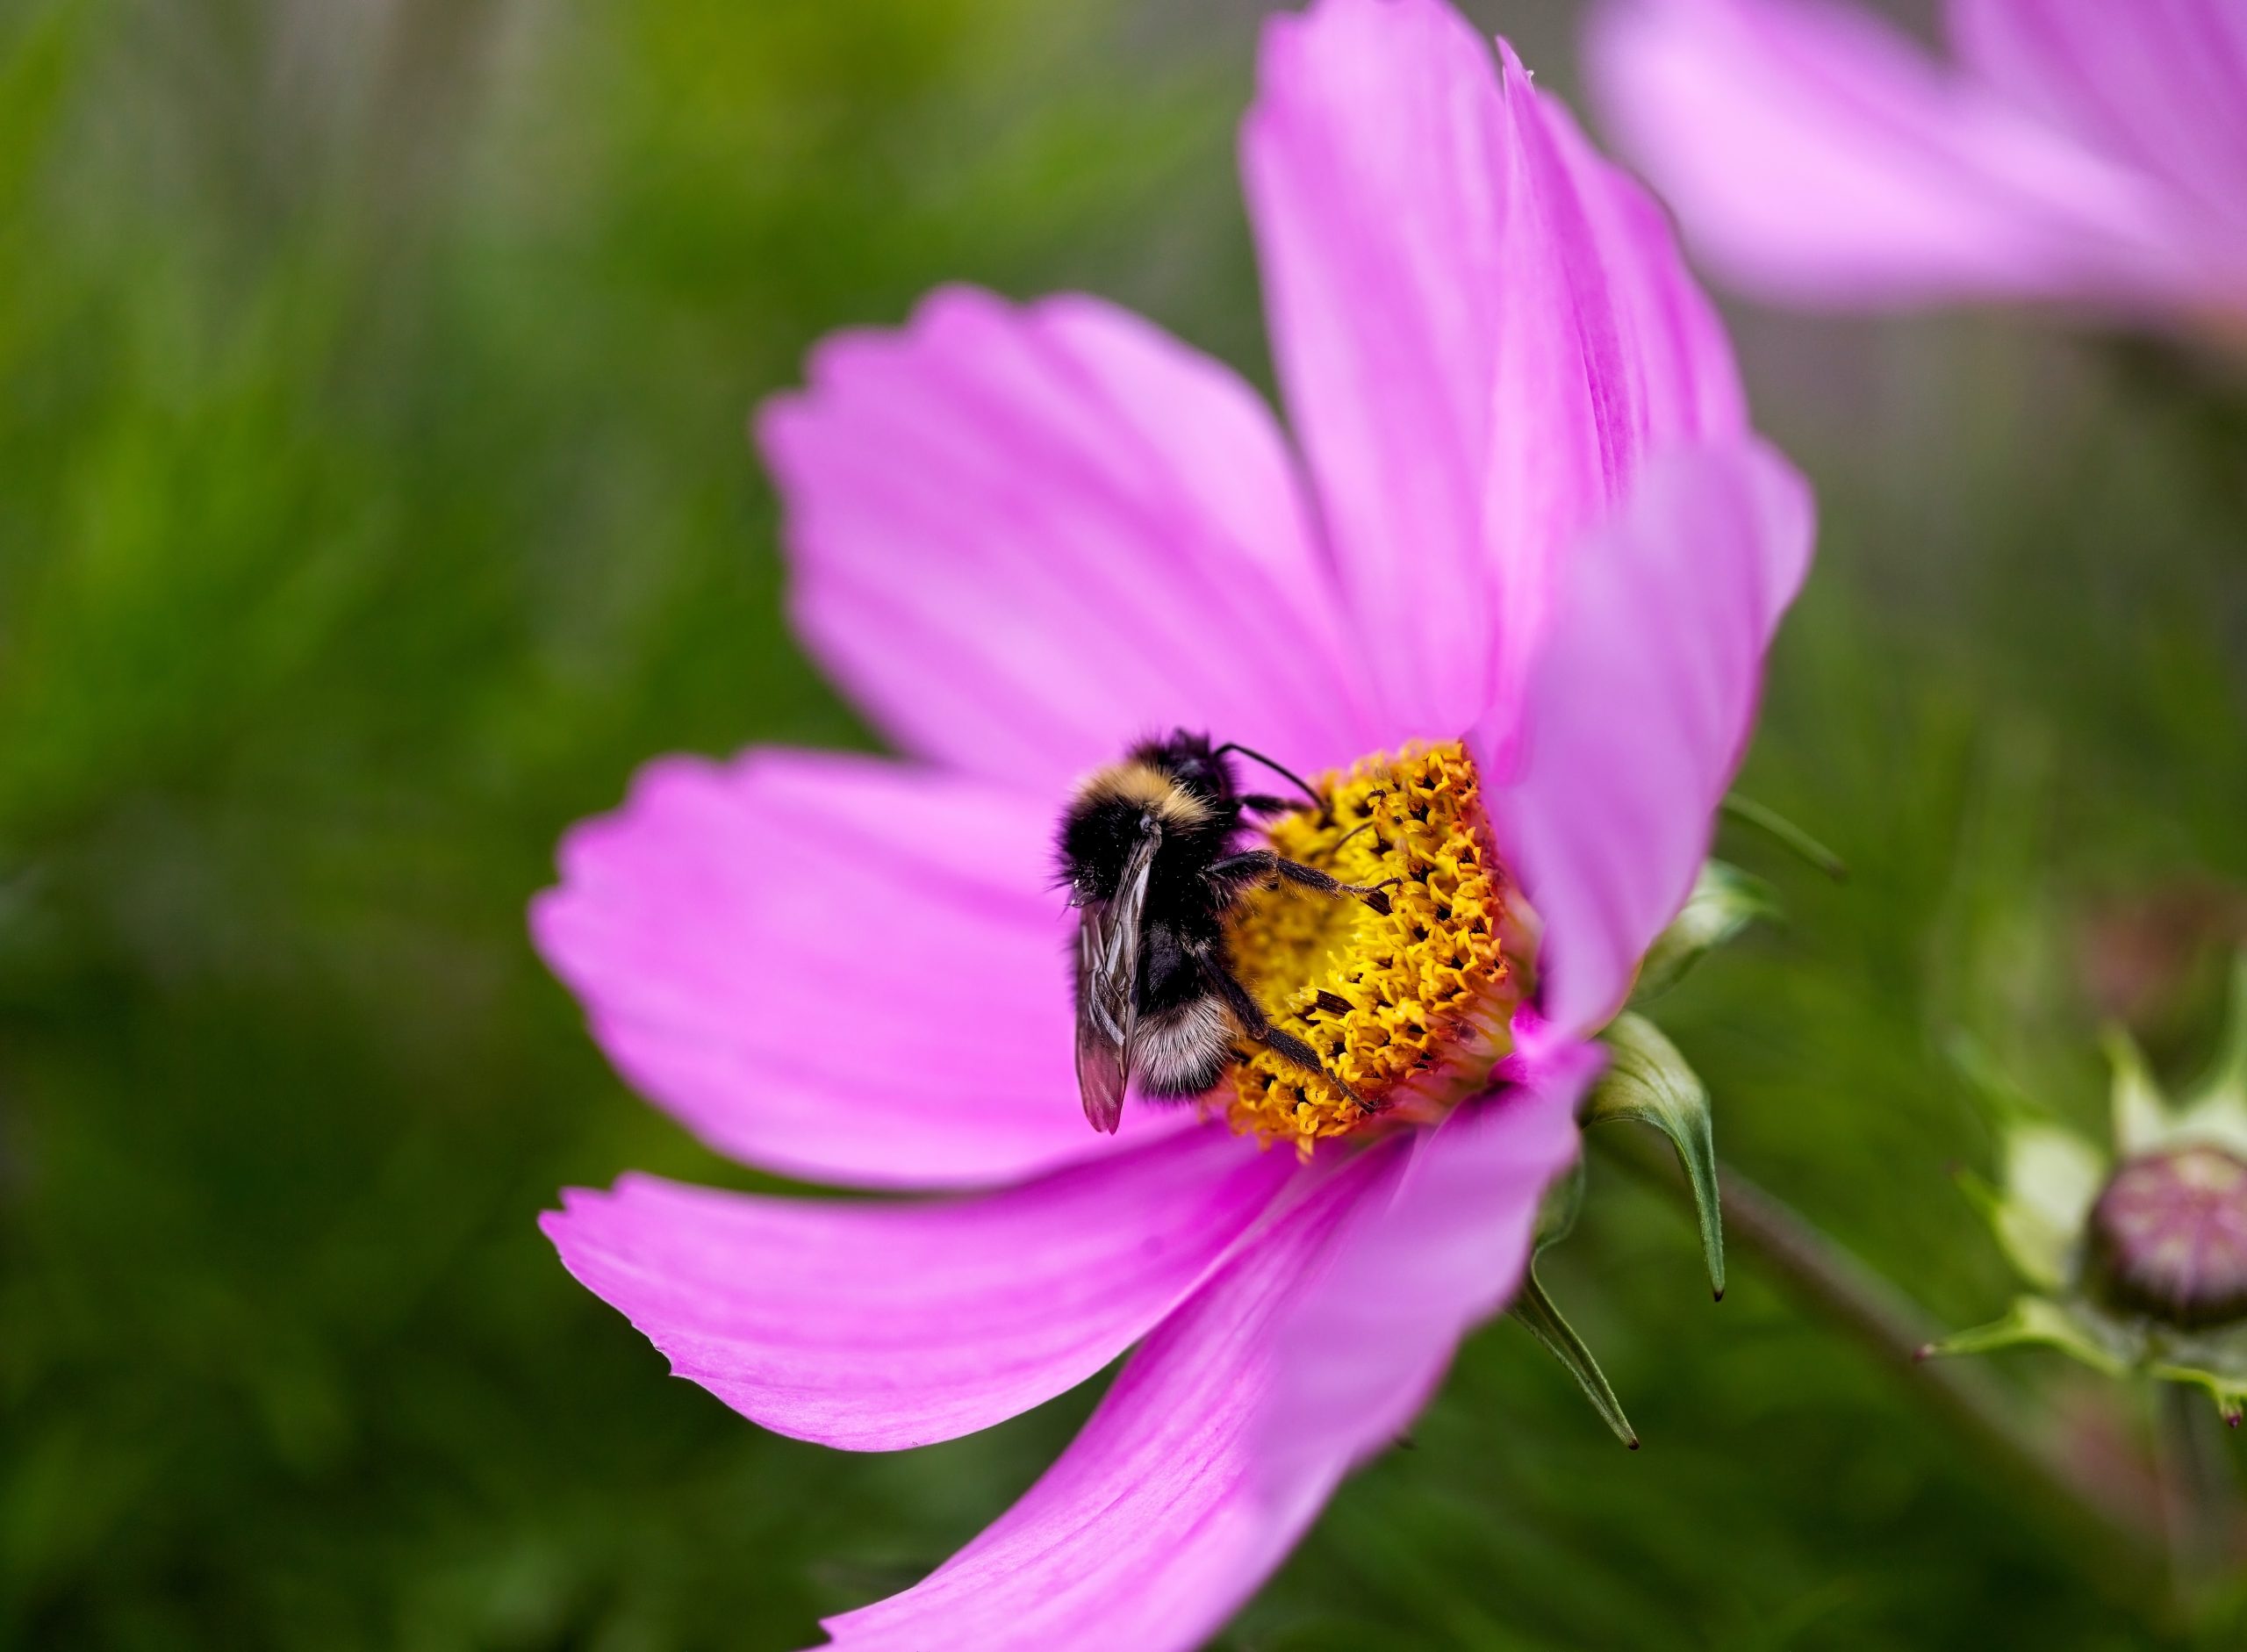 Buzzing brains: Bumblebees can now solve puzzles, study finds